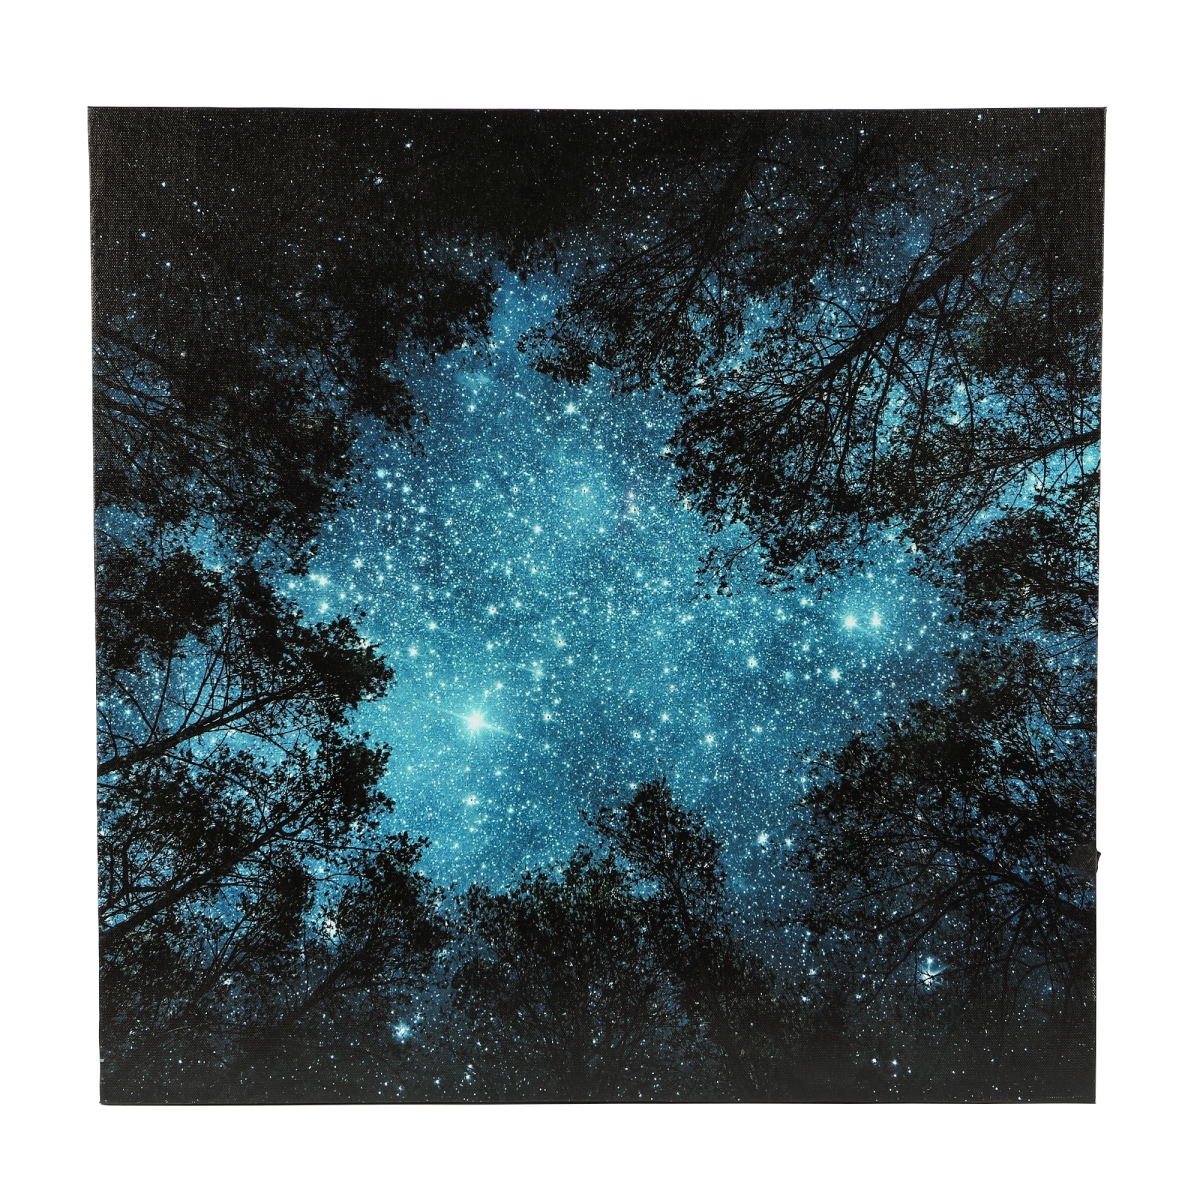 Wha663 Starry Night Sky Canvas Print Wall Art With Led Lights